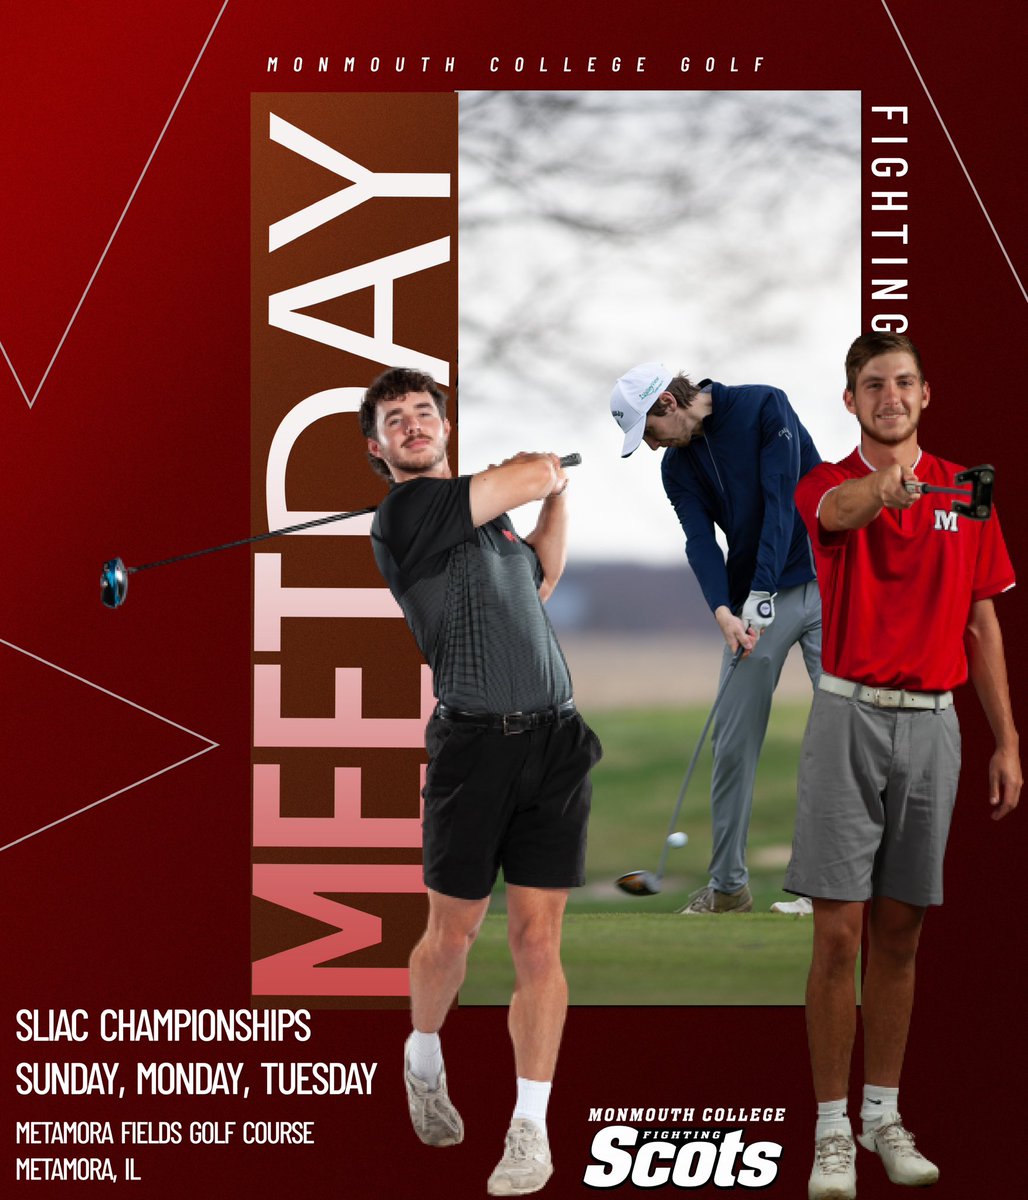 Good luck to @ScotsMGolf at the @SLIAC championships starting today. Monmouth tee times set between 12p-1p for round 1 #RollScots Live stats: results.golfstat.com/public/leaderb…